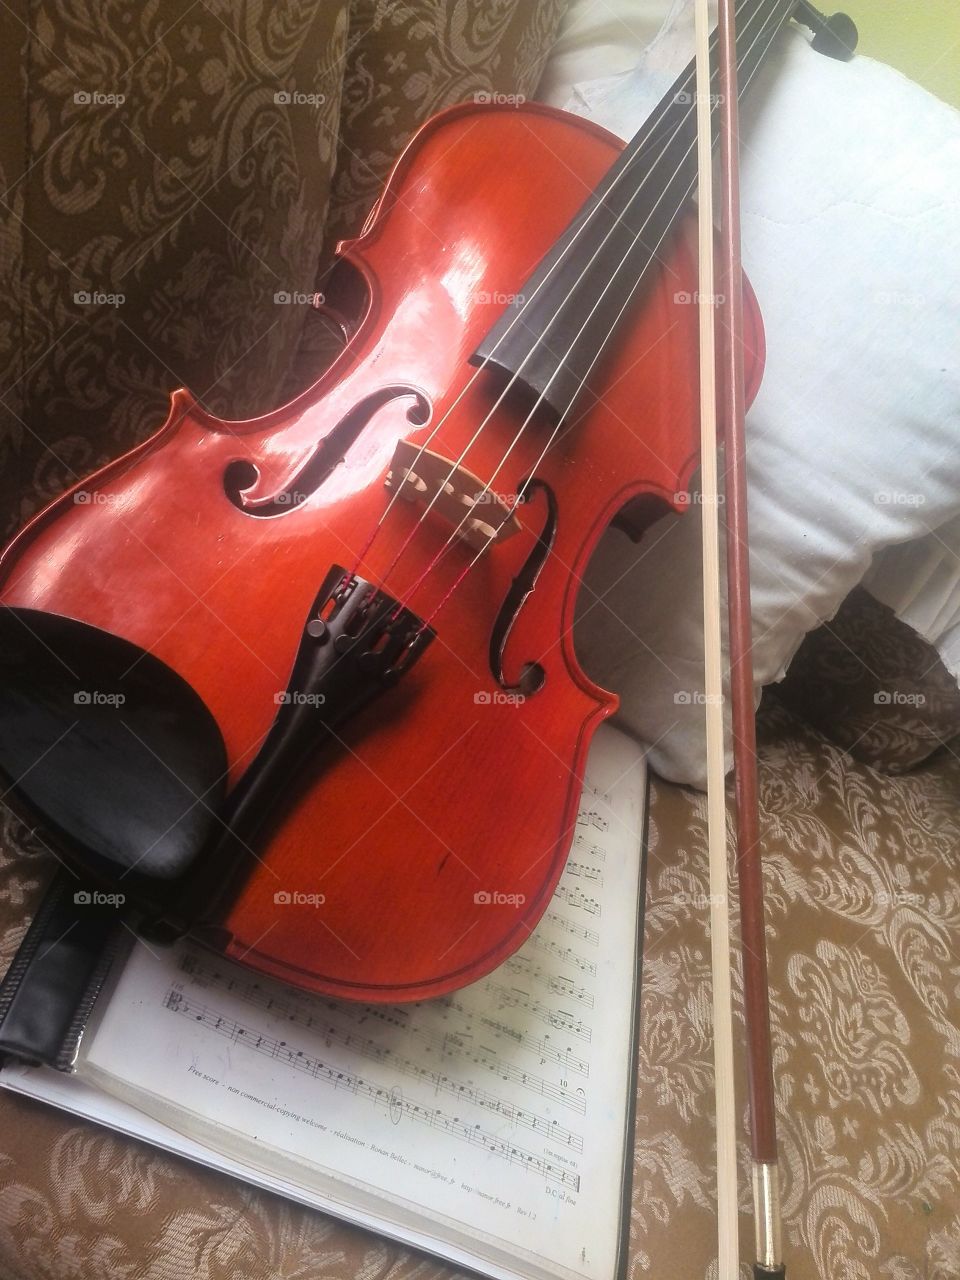 Viola; sharp, looking red, ready to string. 